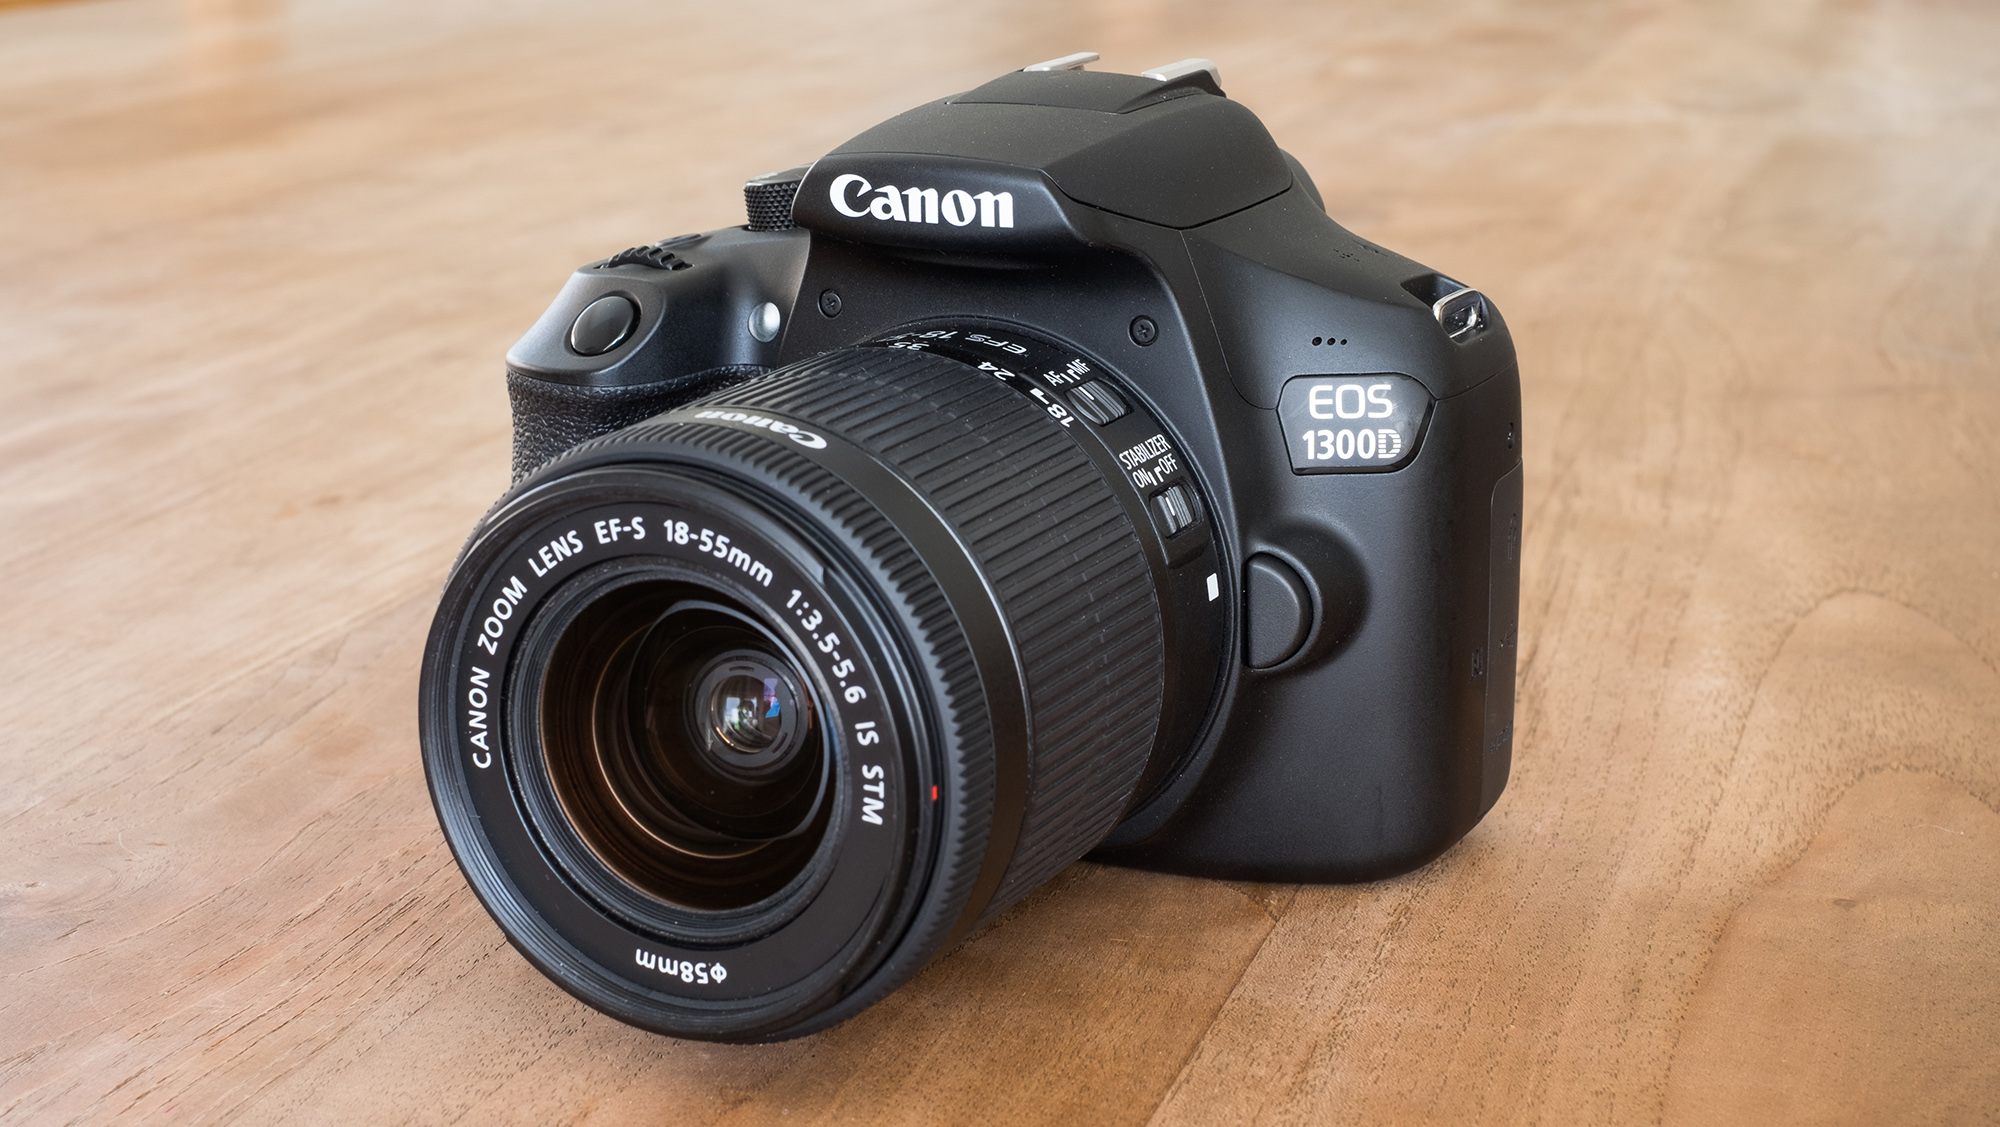 canon eos t3i software download